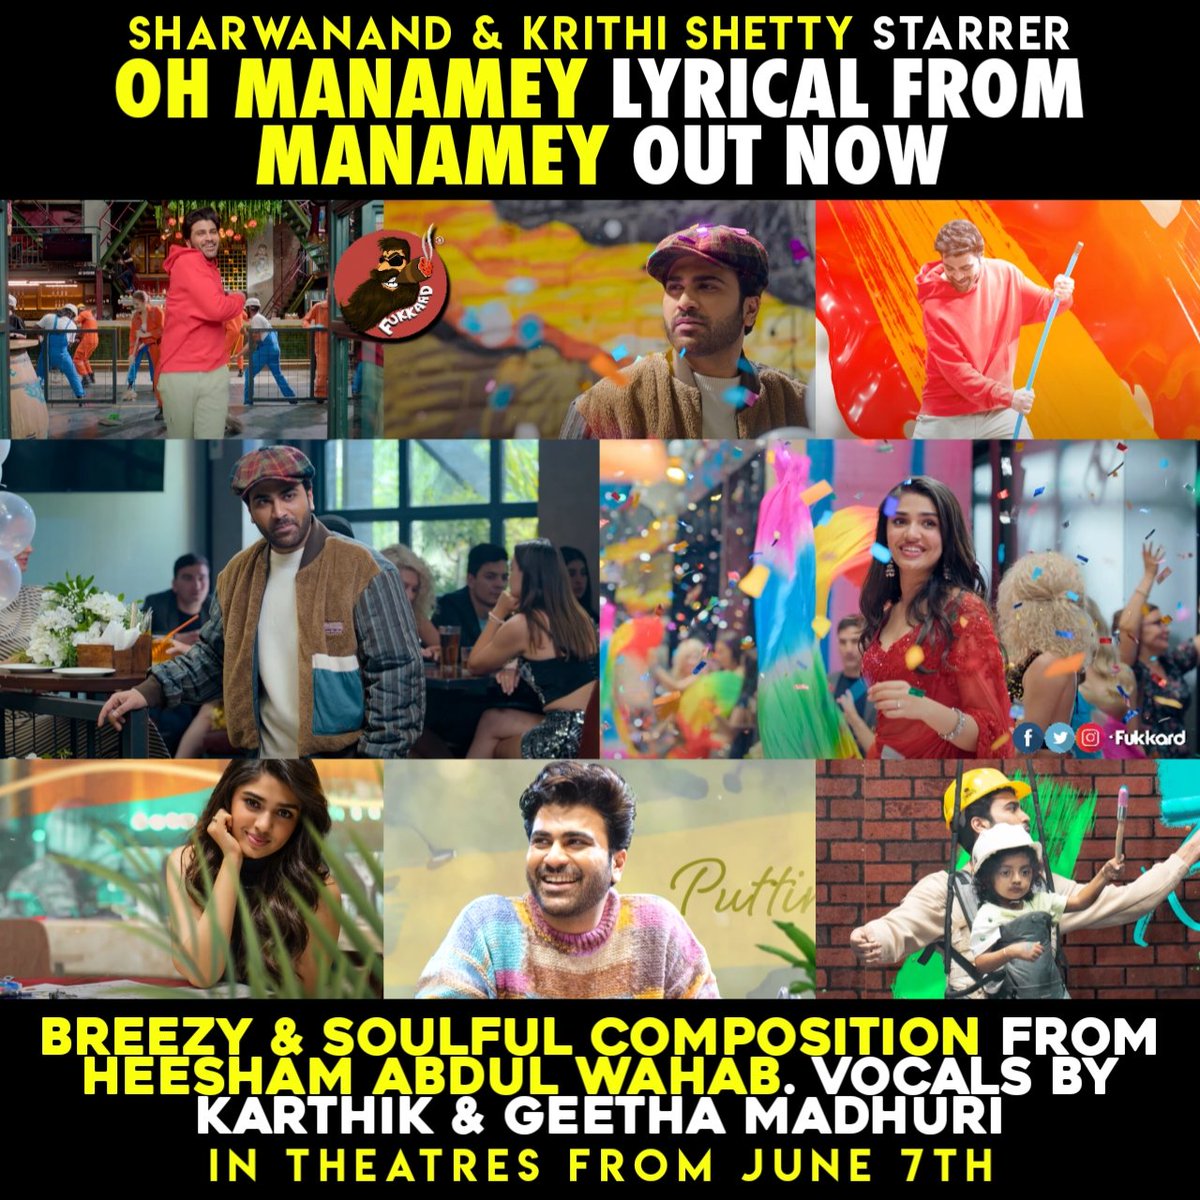 #OhManamey 2nd single from #Manamay out now -

youtu.be/JiT0Gi2Hmk4

Worldwide grand release in theatres on June  ✨ #ManameyOnJune7th